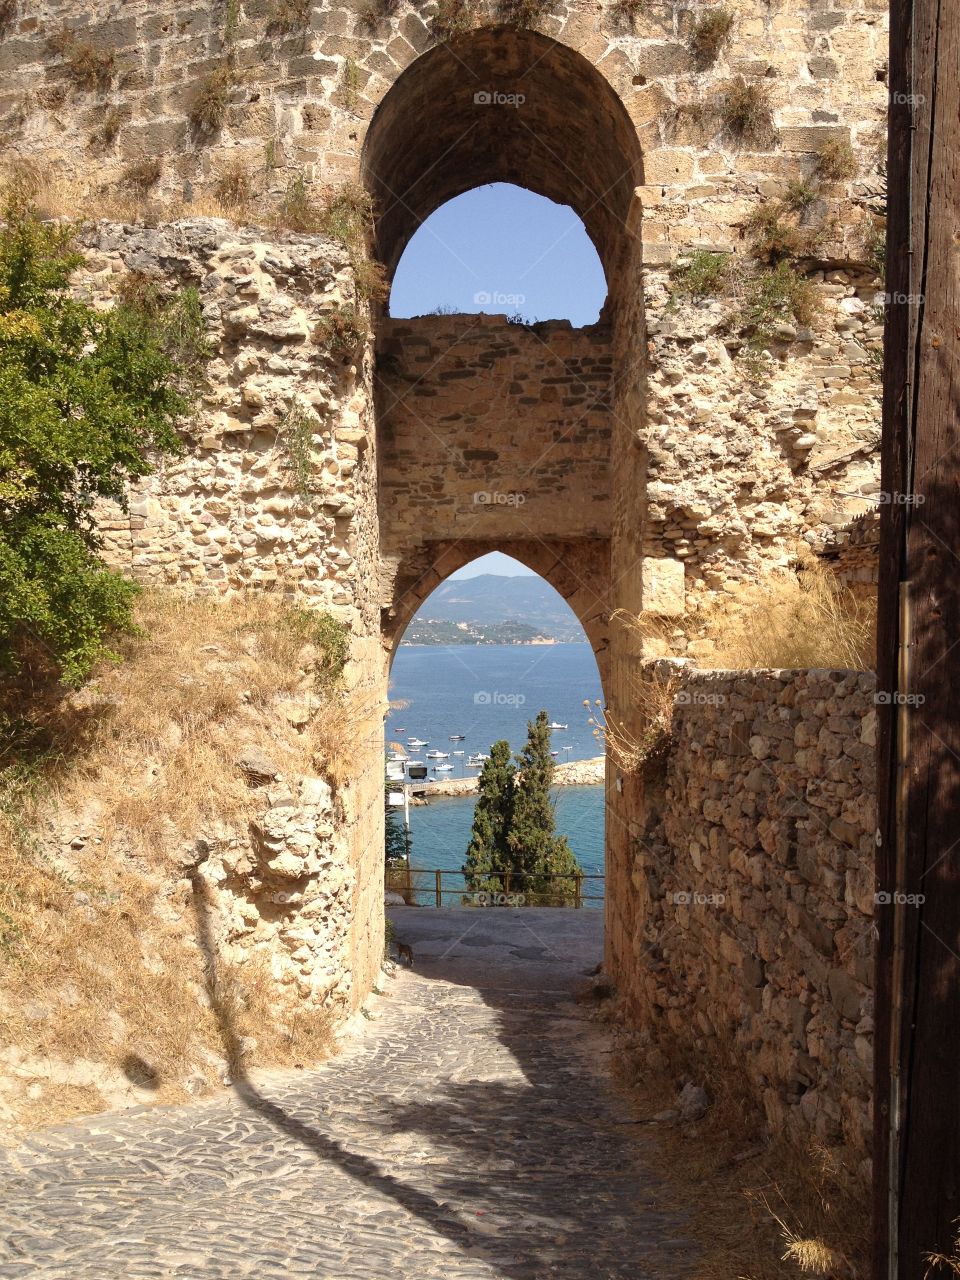 Arched doorway of an old castle in Koroni, Greece overlooking the beautiful blue sea below 